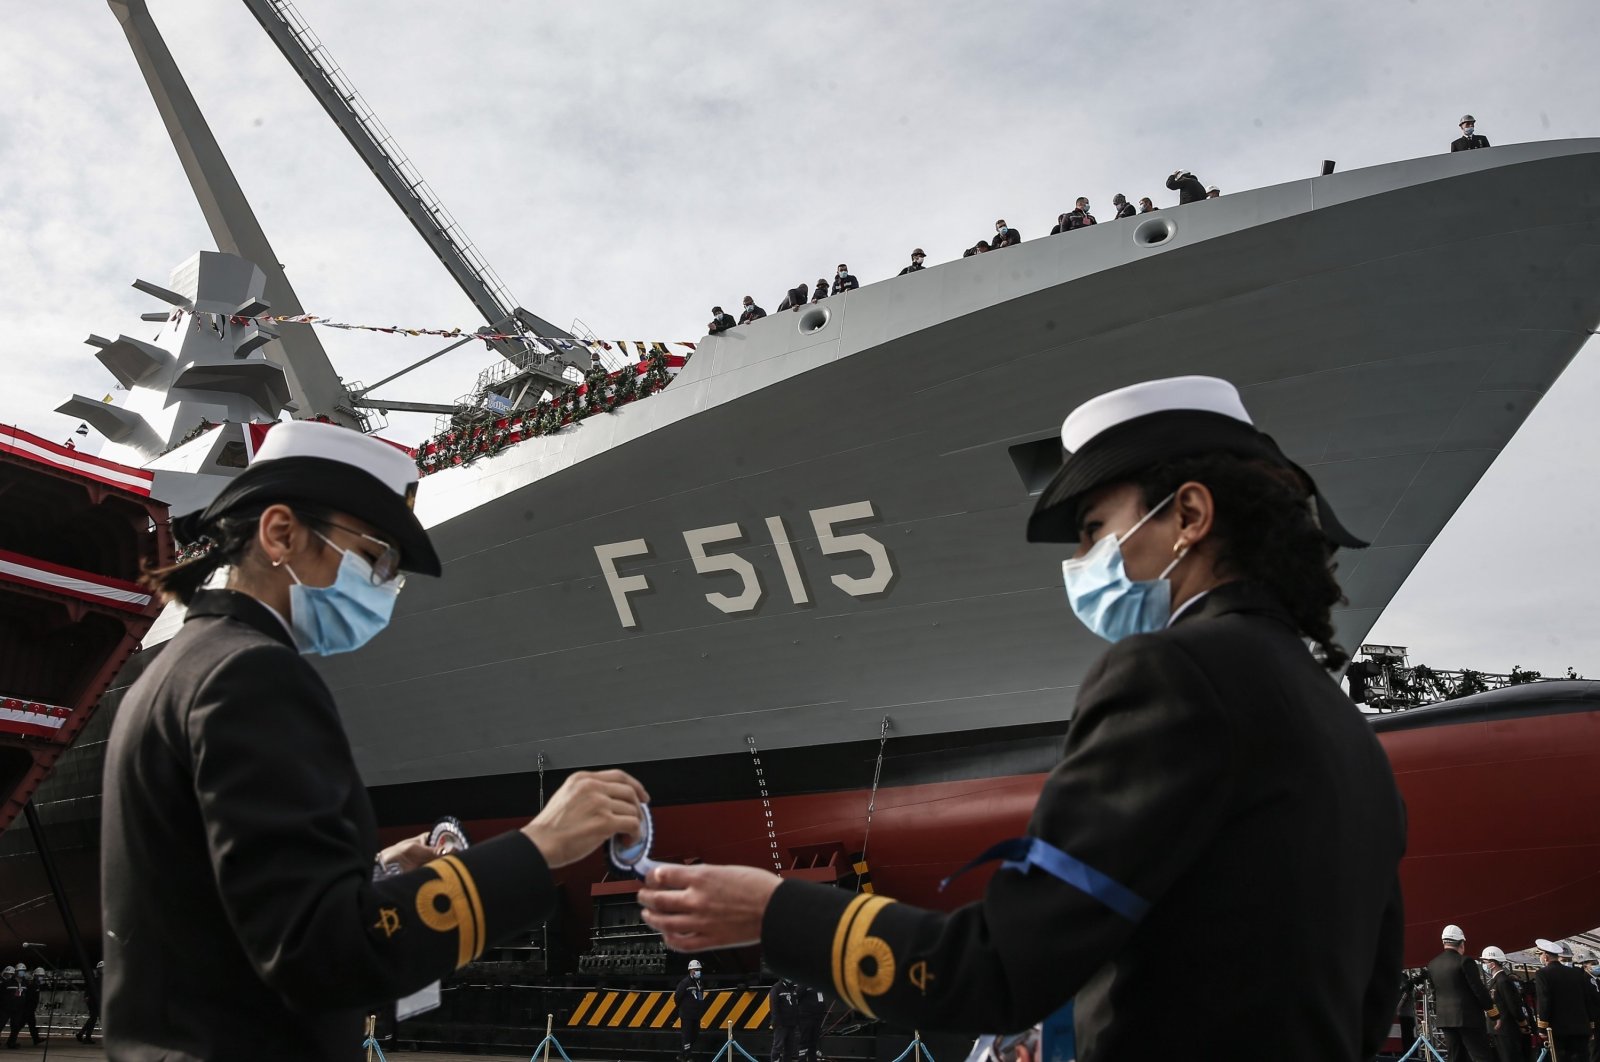 The TCG Istanbul (F515) is launched during a ceremony in Istanbul, Turkey, Jan. 23, 2021. (DHA Photo)